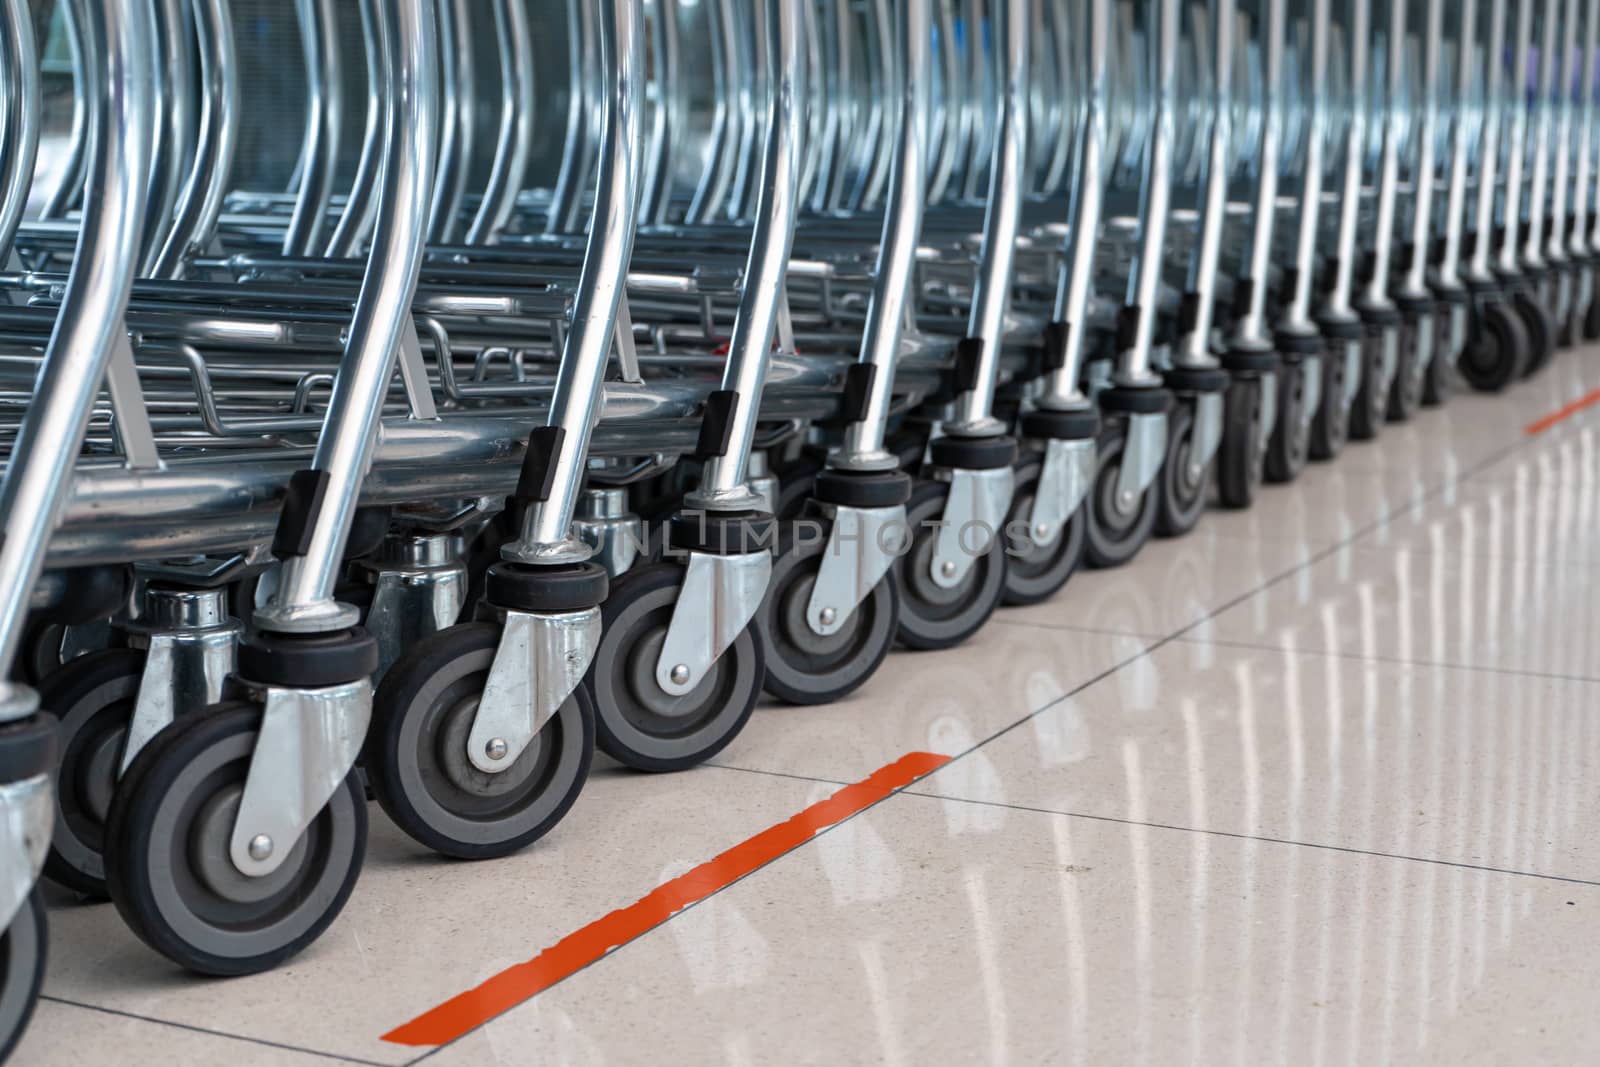 A row of carts in a supermarket. Carts for luggage